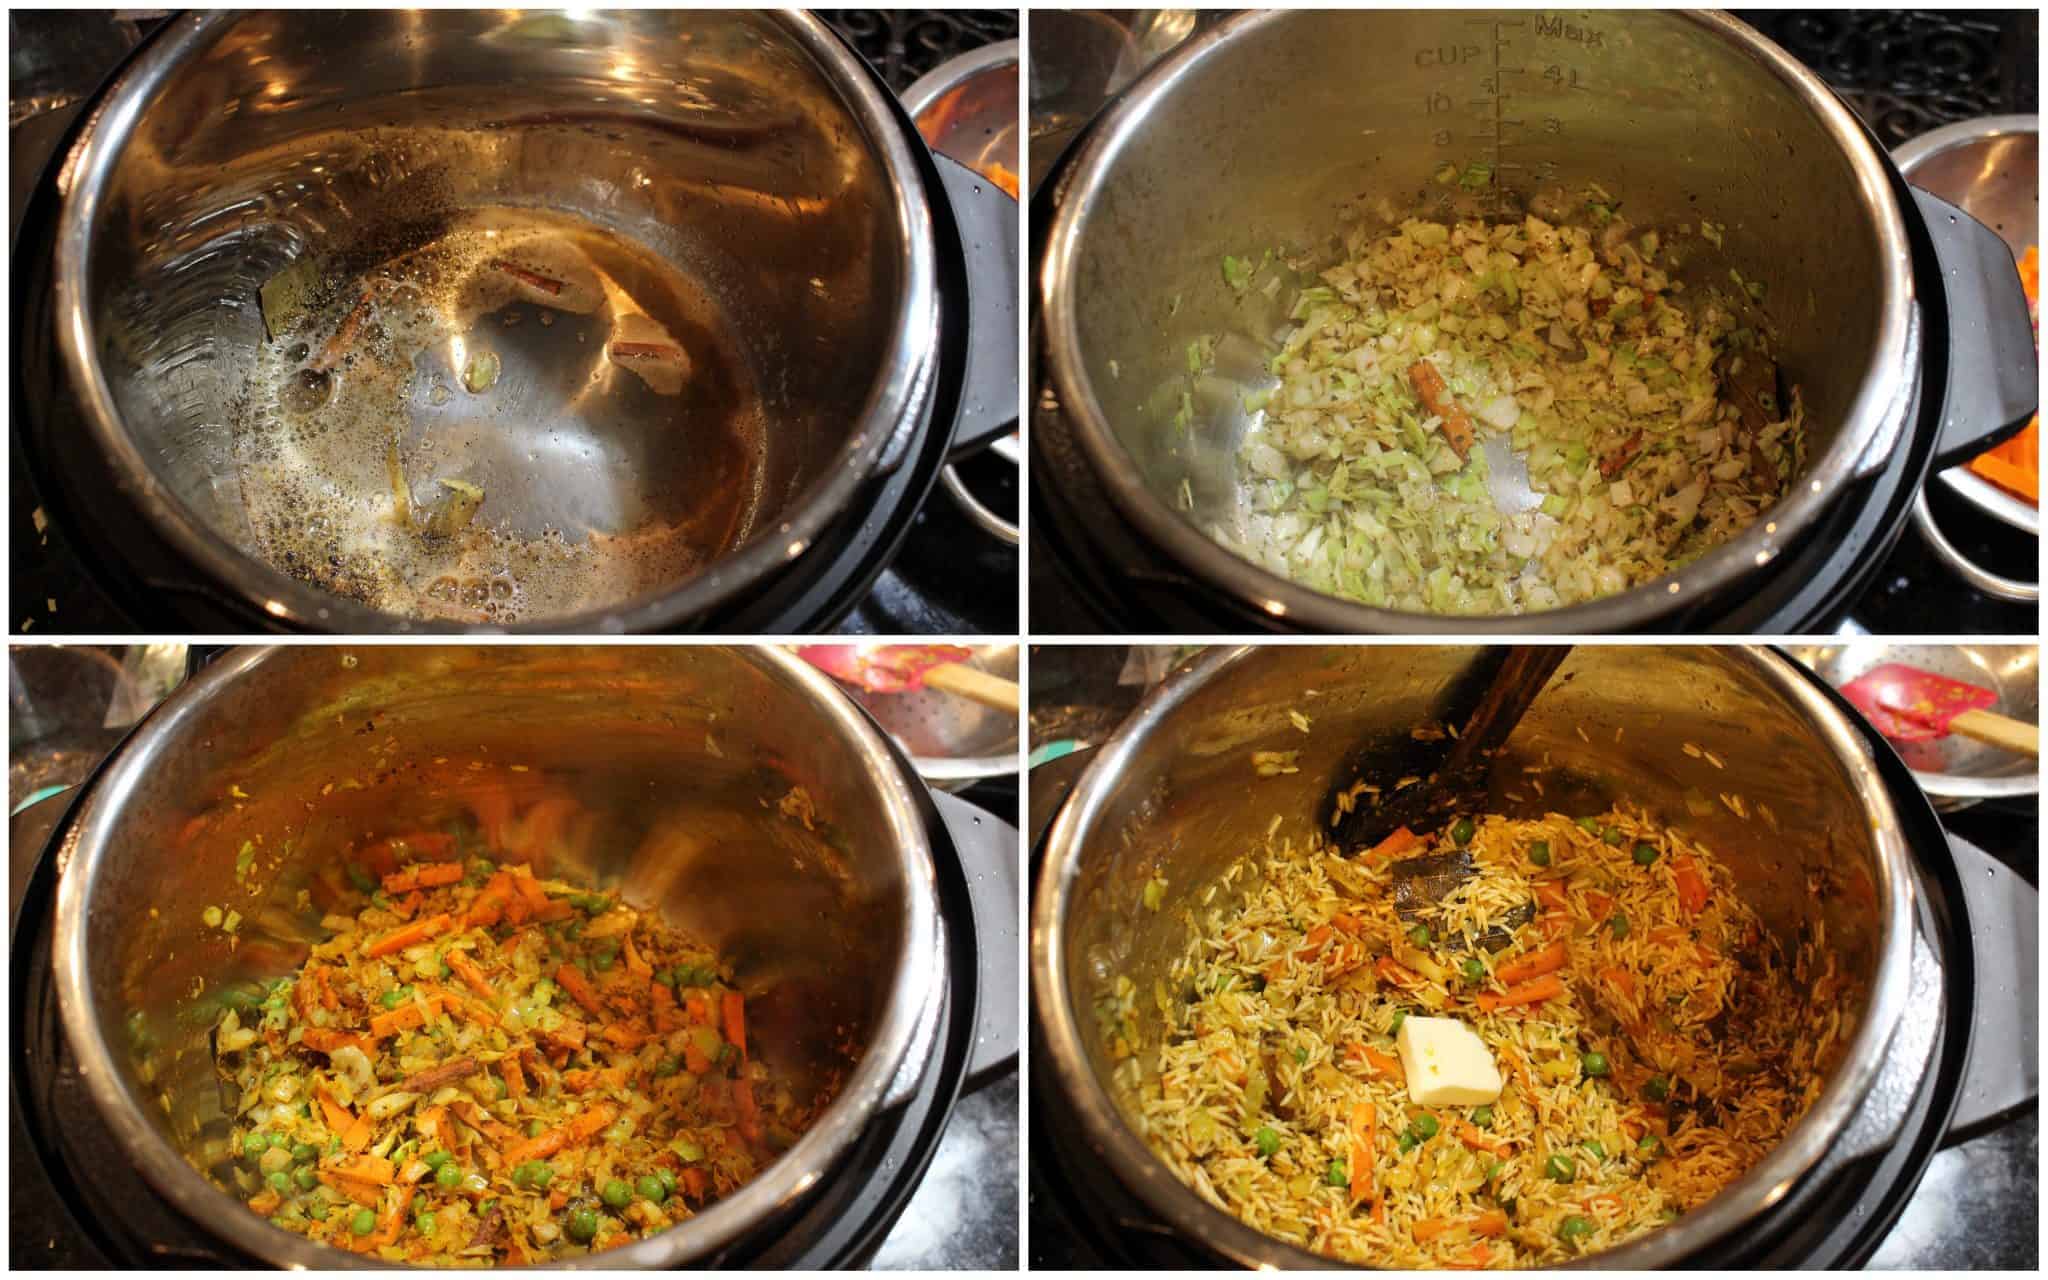 Cooking rice and veggies in a pot and mixing it.